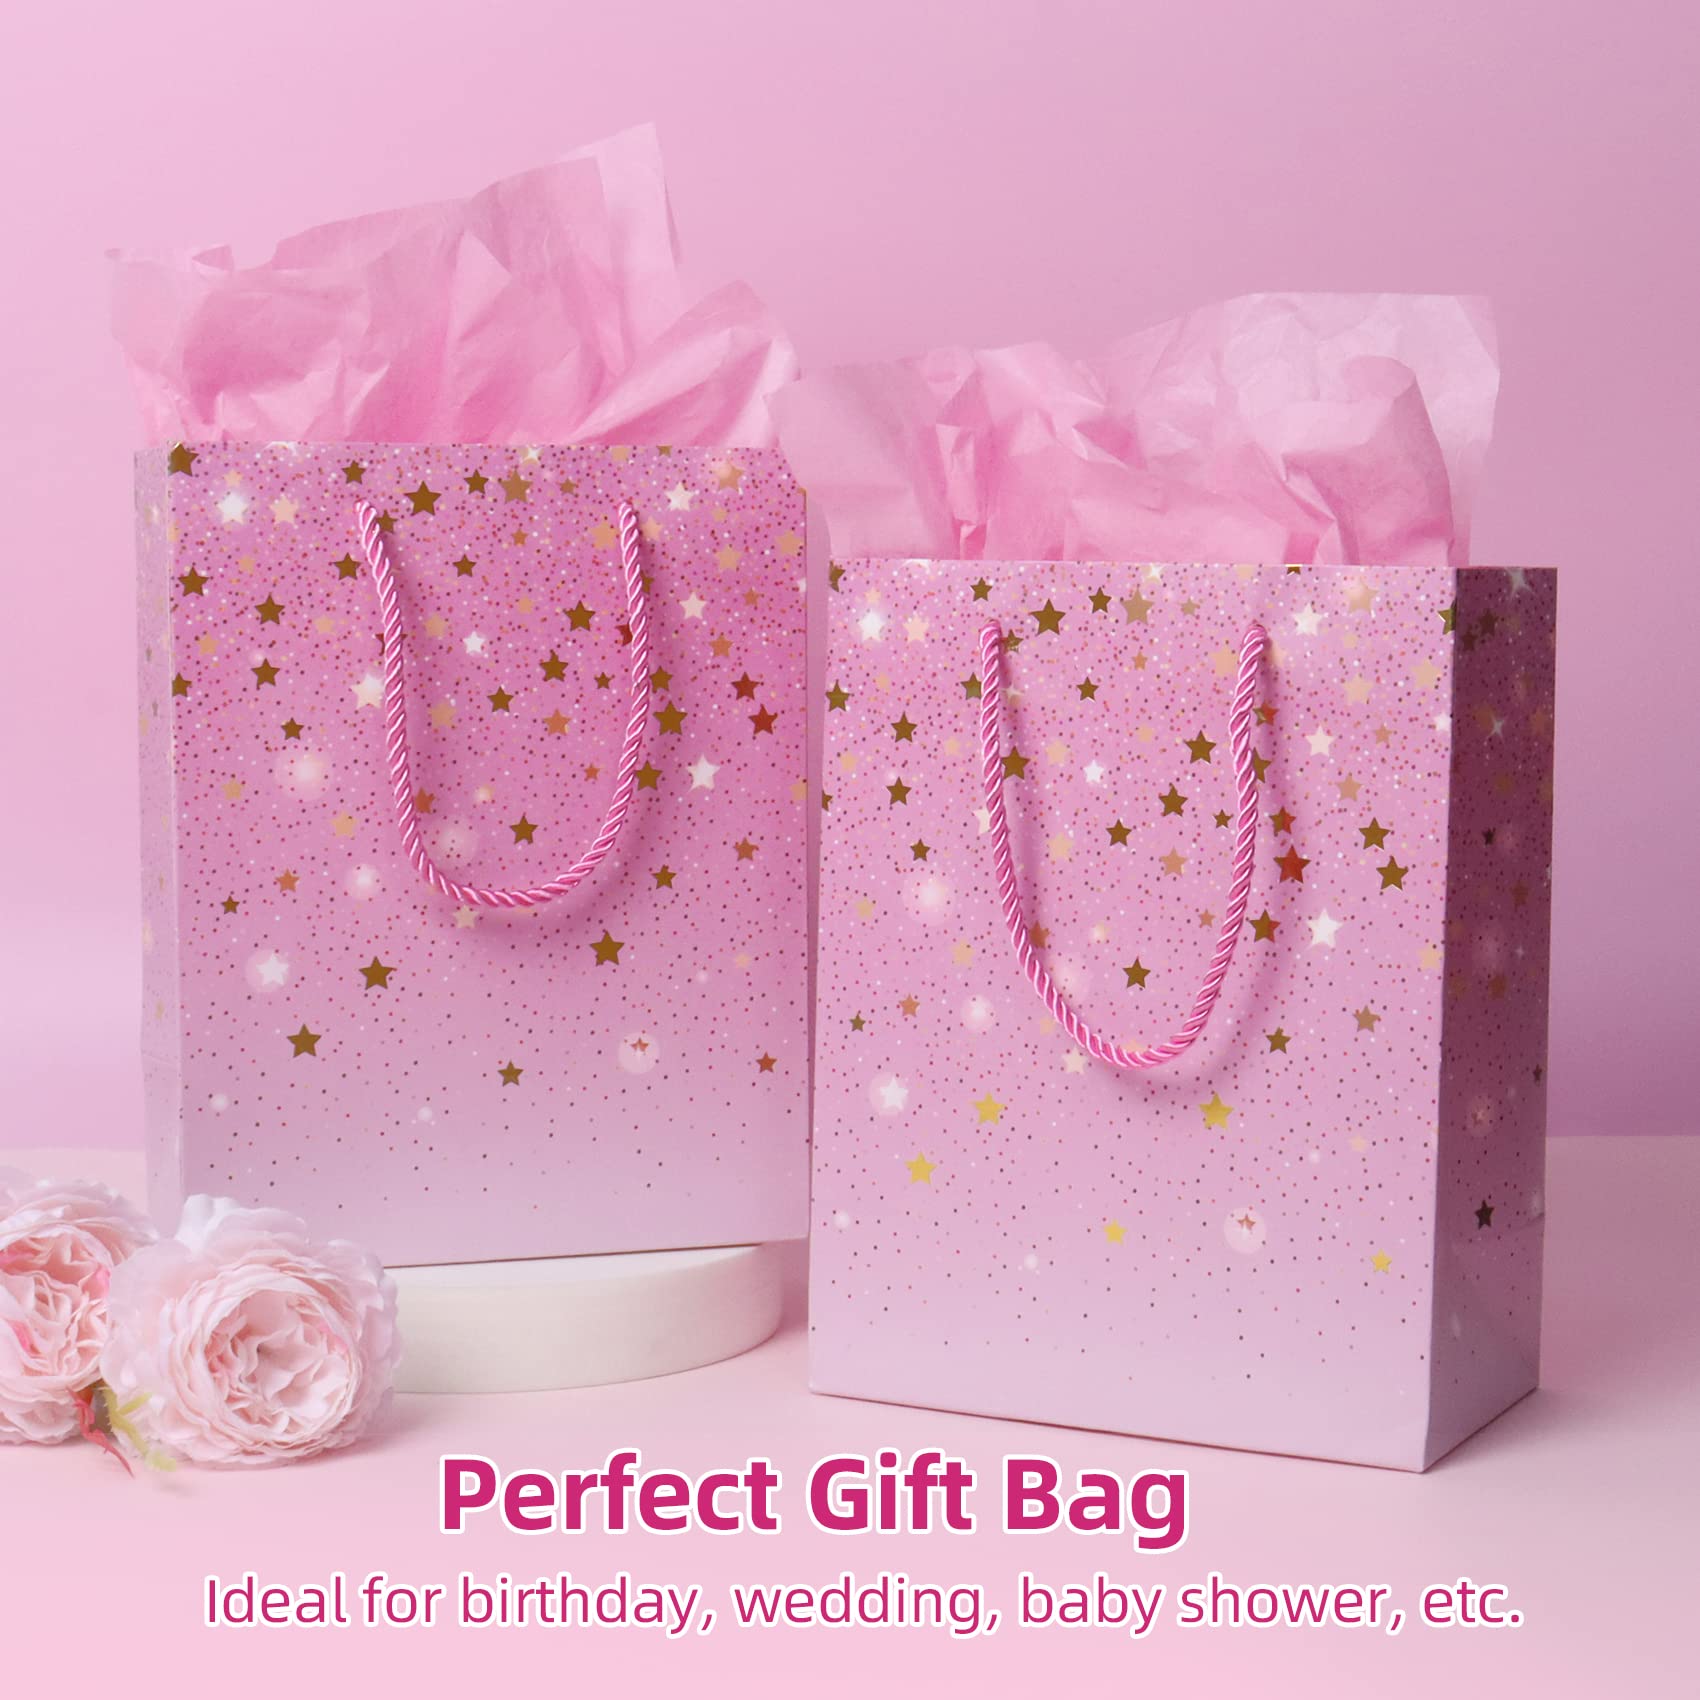 2Pcs Gift Bags with Tissue Paper, 9× 7× 4 Inches Small Medium Size Gift Bags for Present, Birthday Gift Bags Paper Gift Bags for Birthday, Baby Shower, Wedding Gift(Purple)